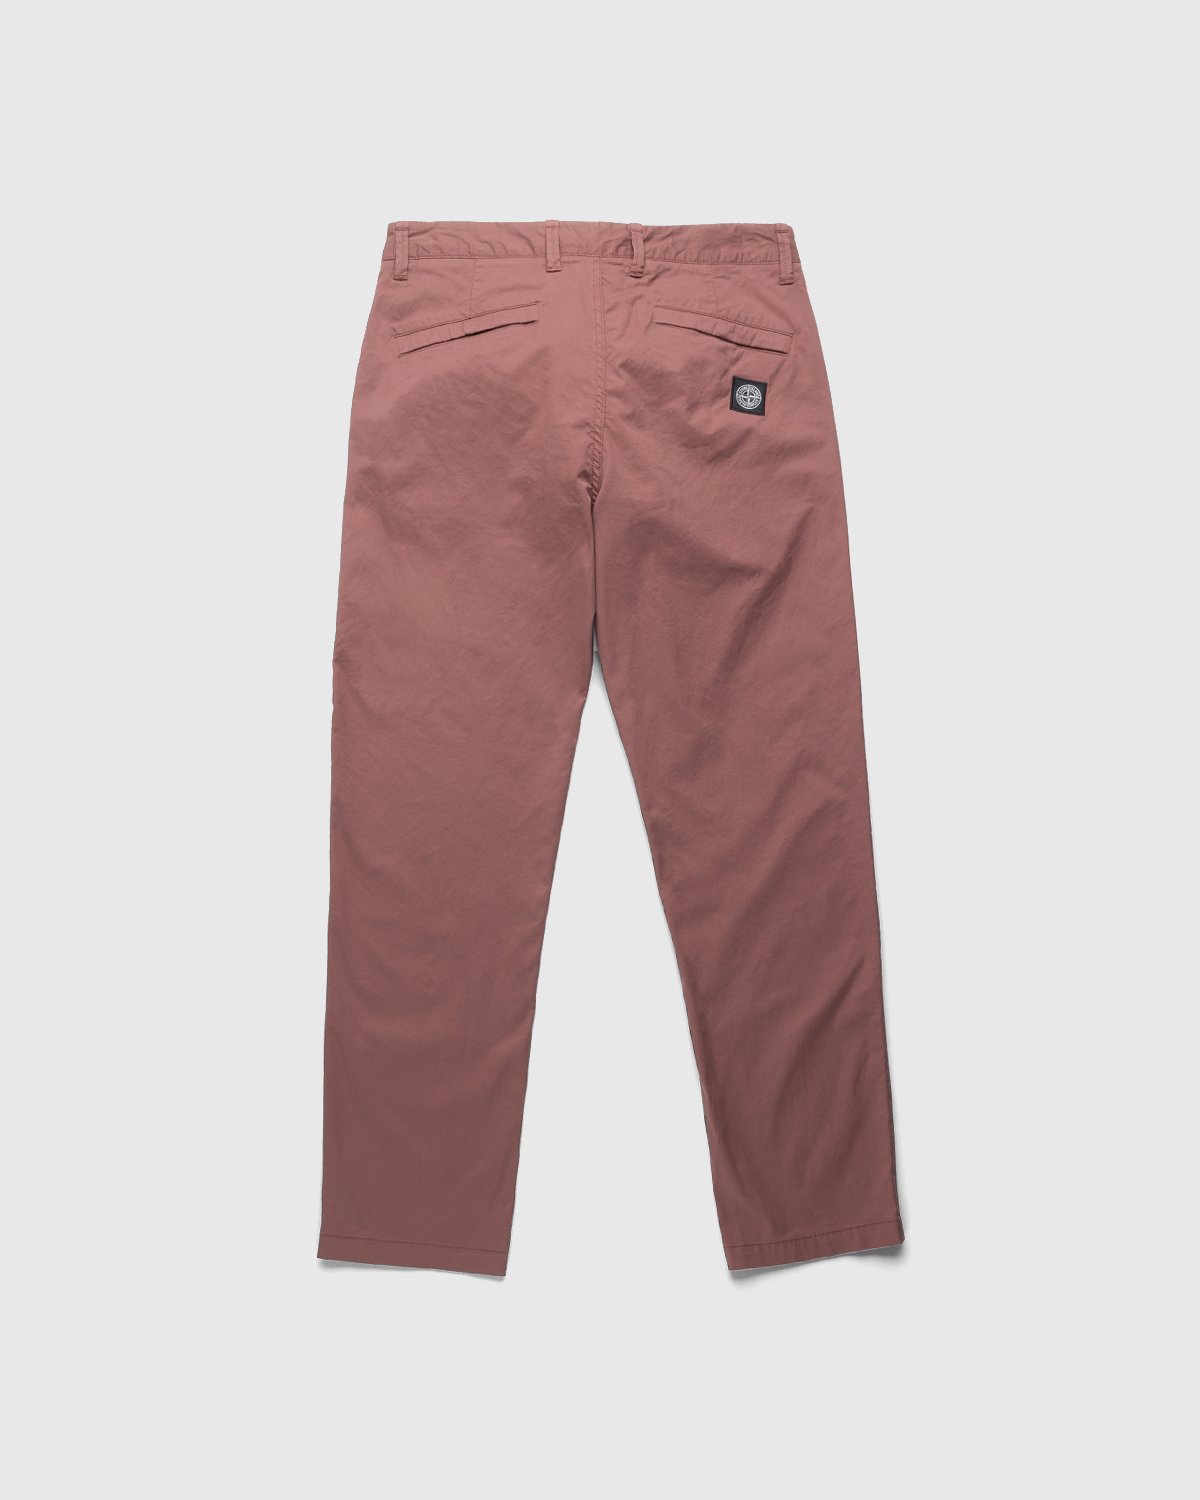 Stone Island - Pants Brick Red - Clothing - Red - Image 2